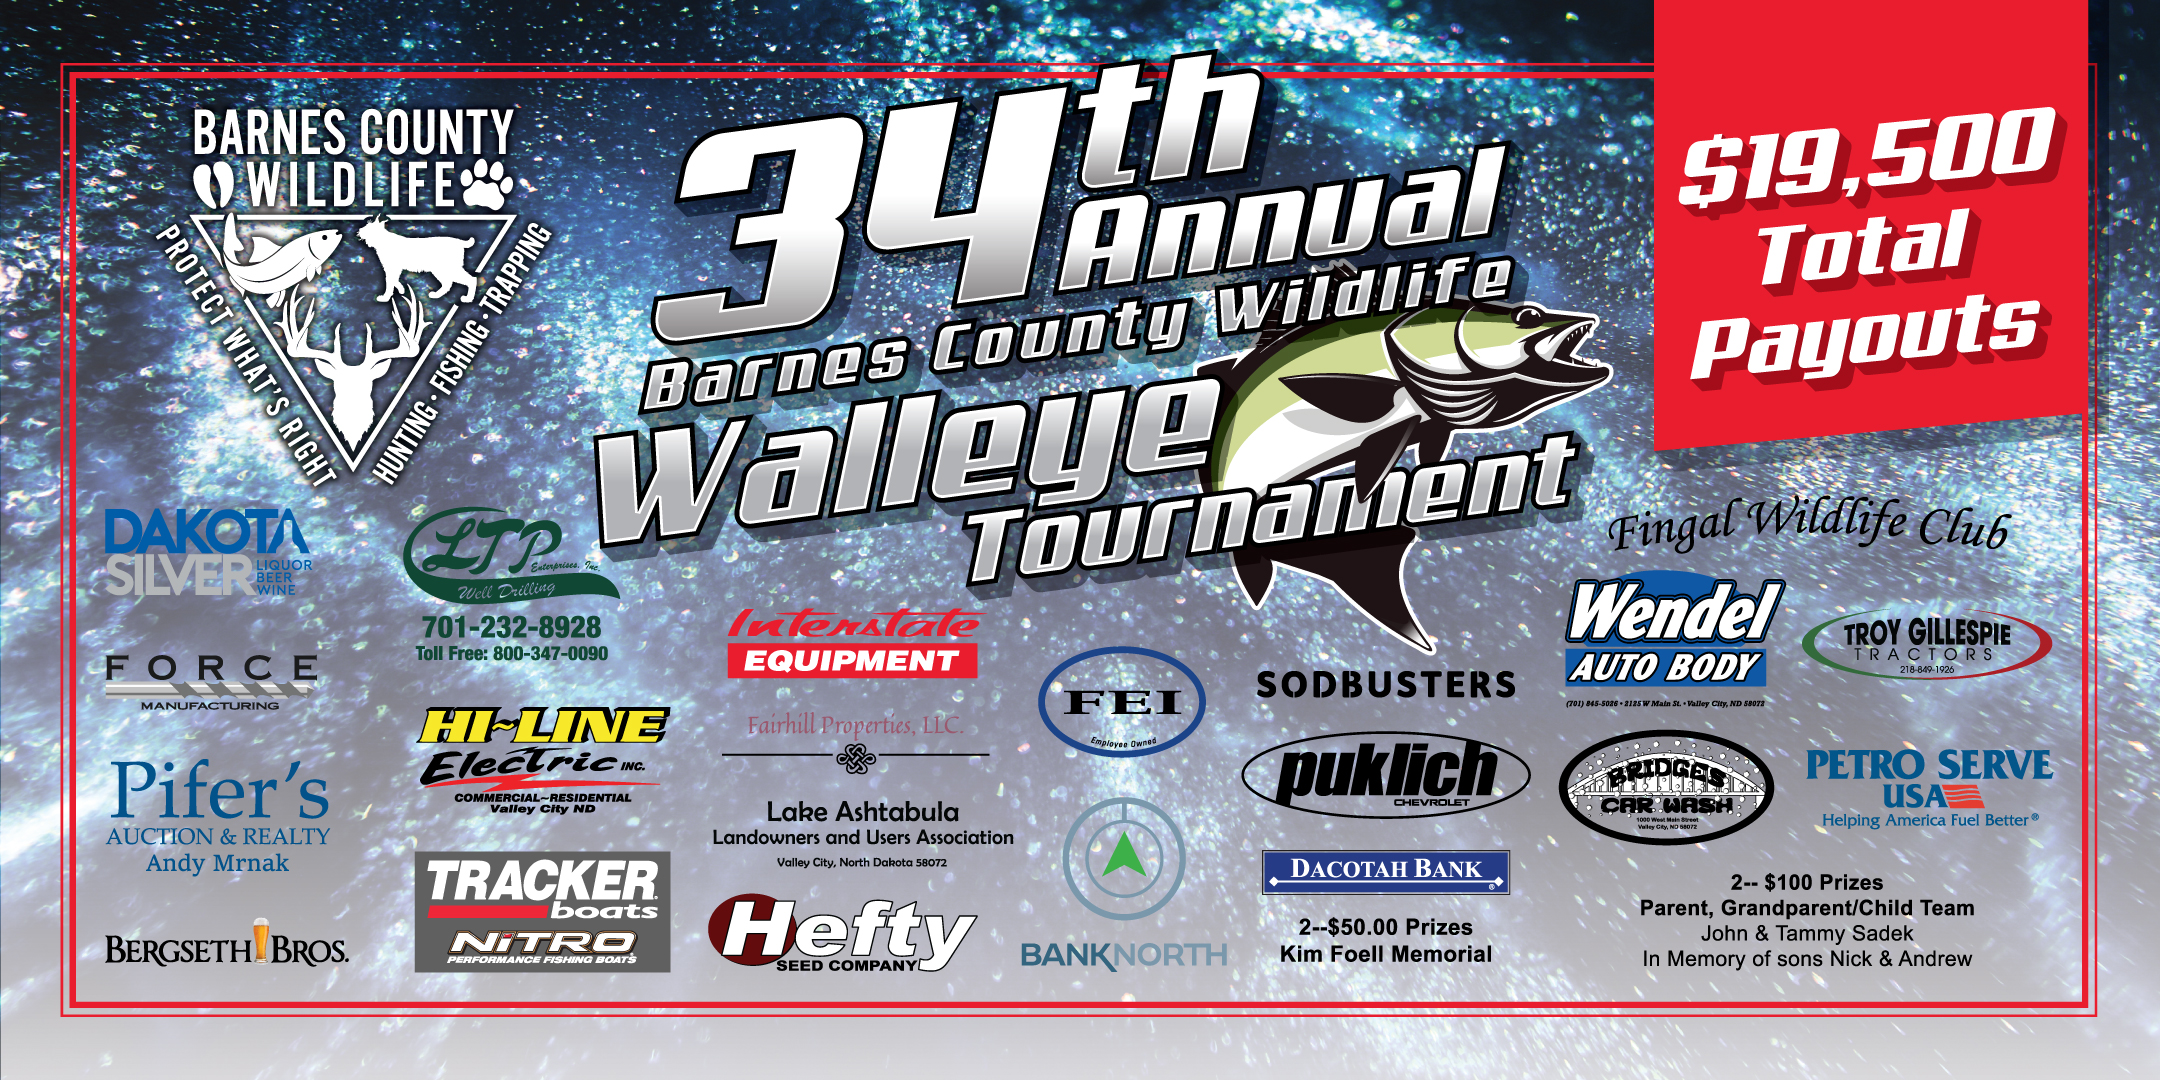 BCW_Fishing_Banner_Adjusted_Proof(25%).jpg